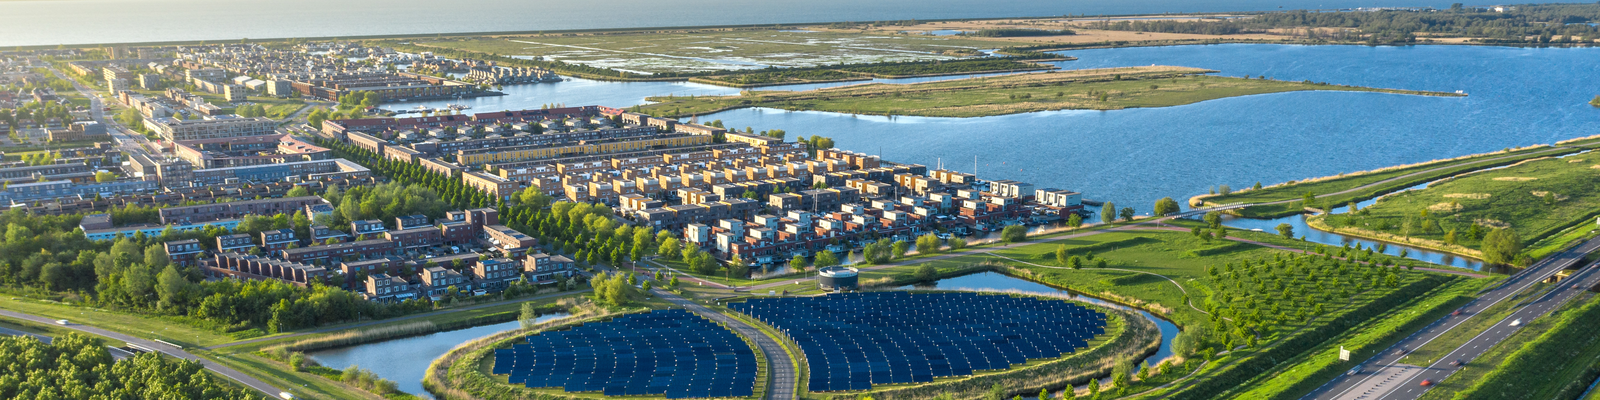 Aerial View of a Sustainable city in the Netherlands. 